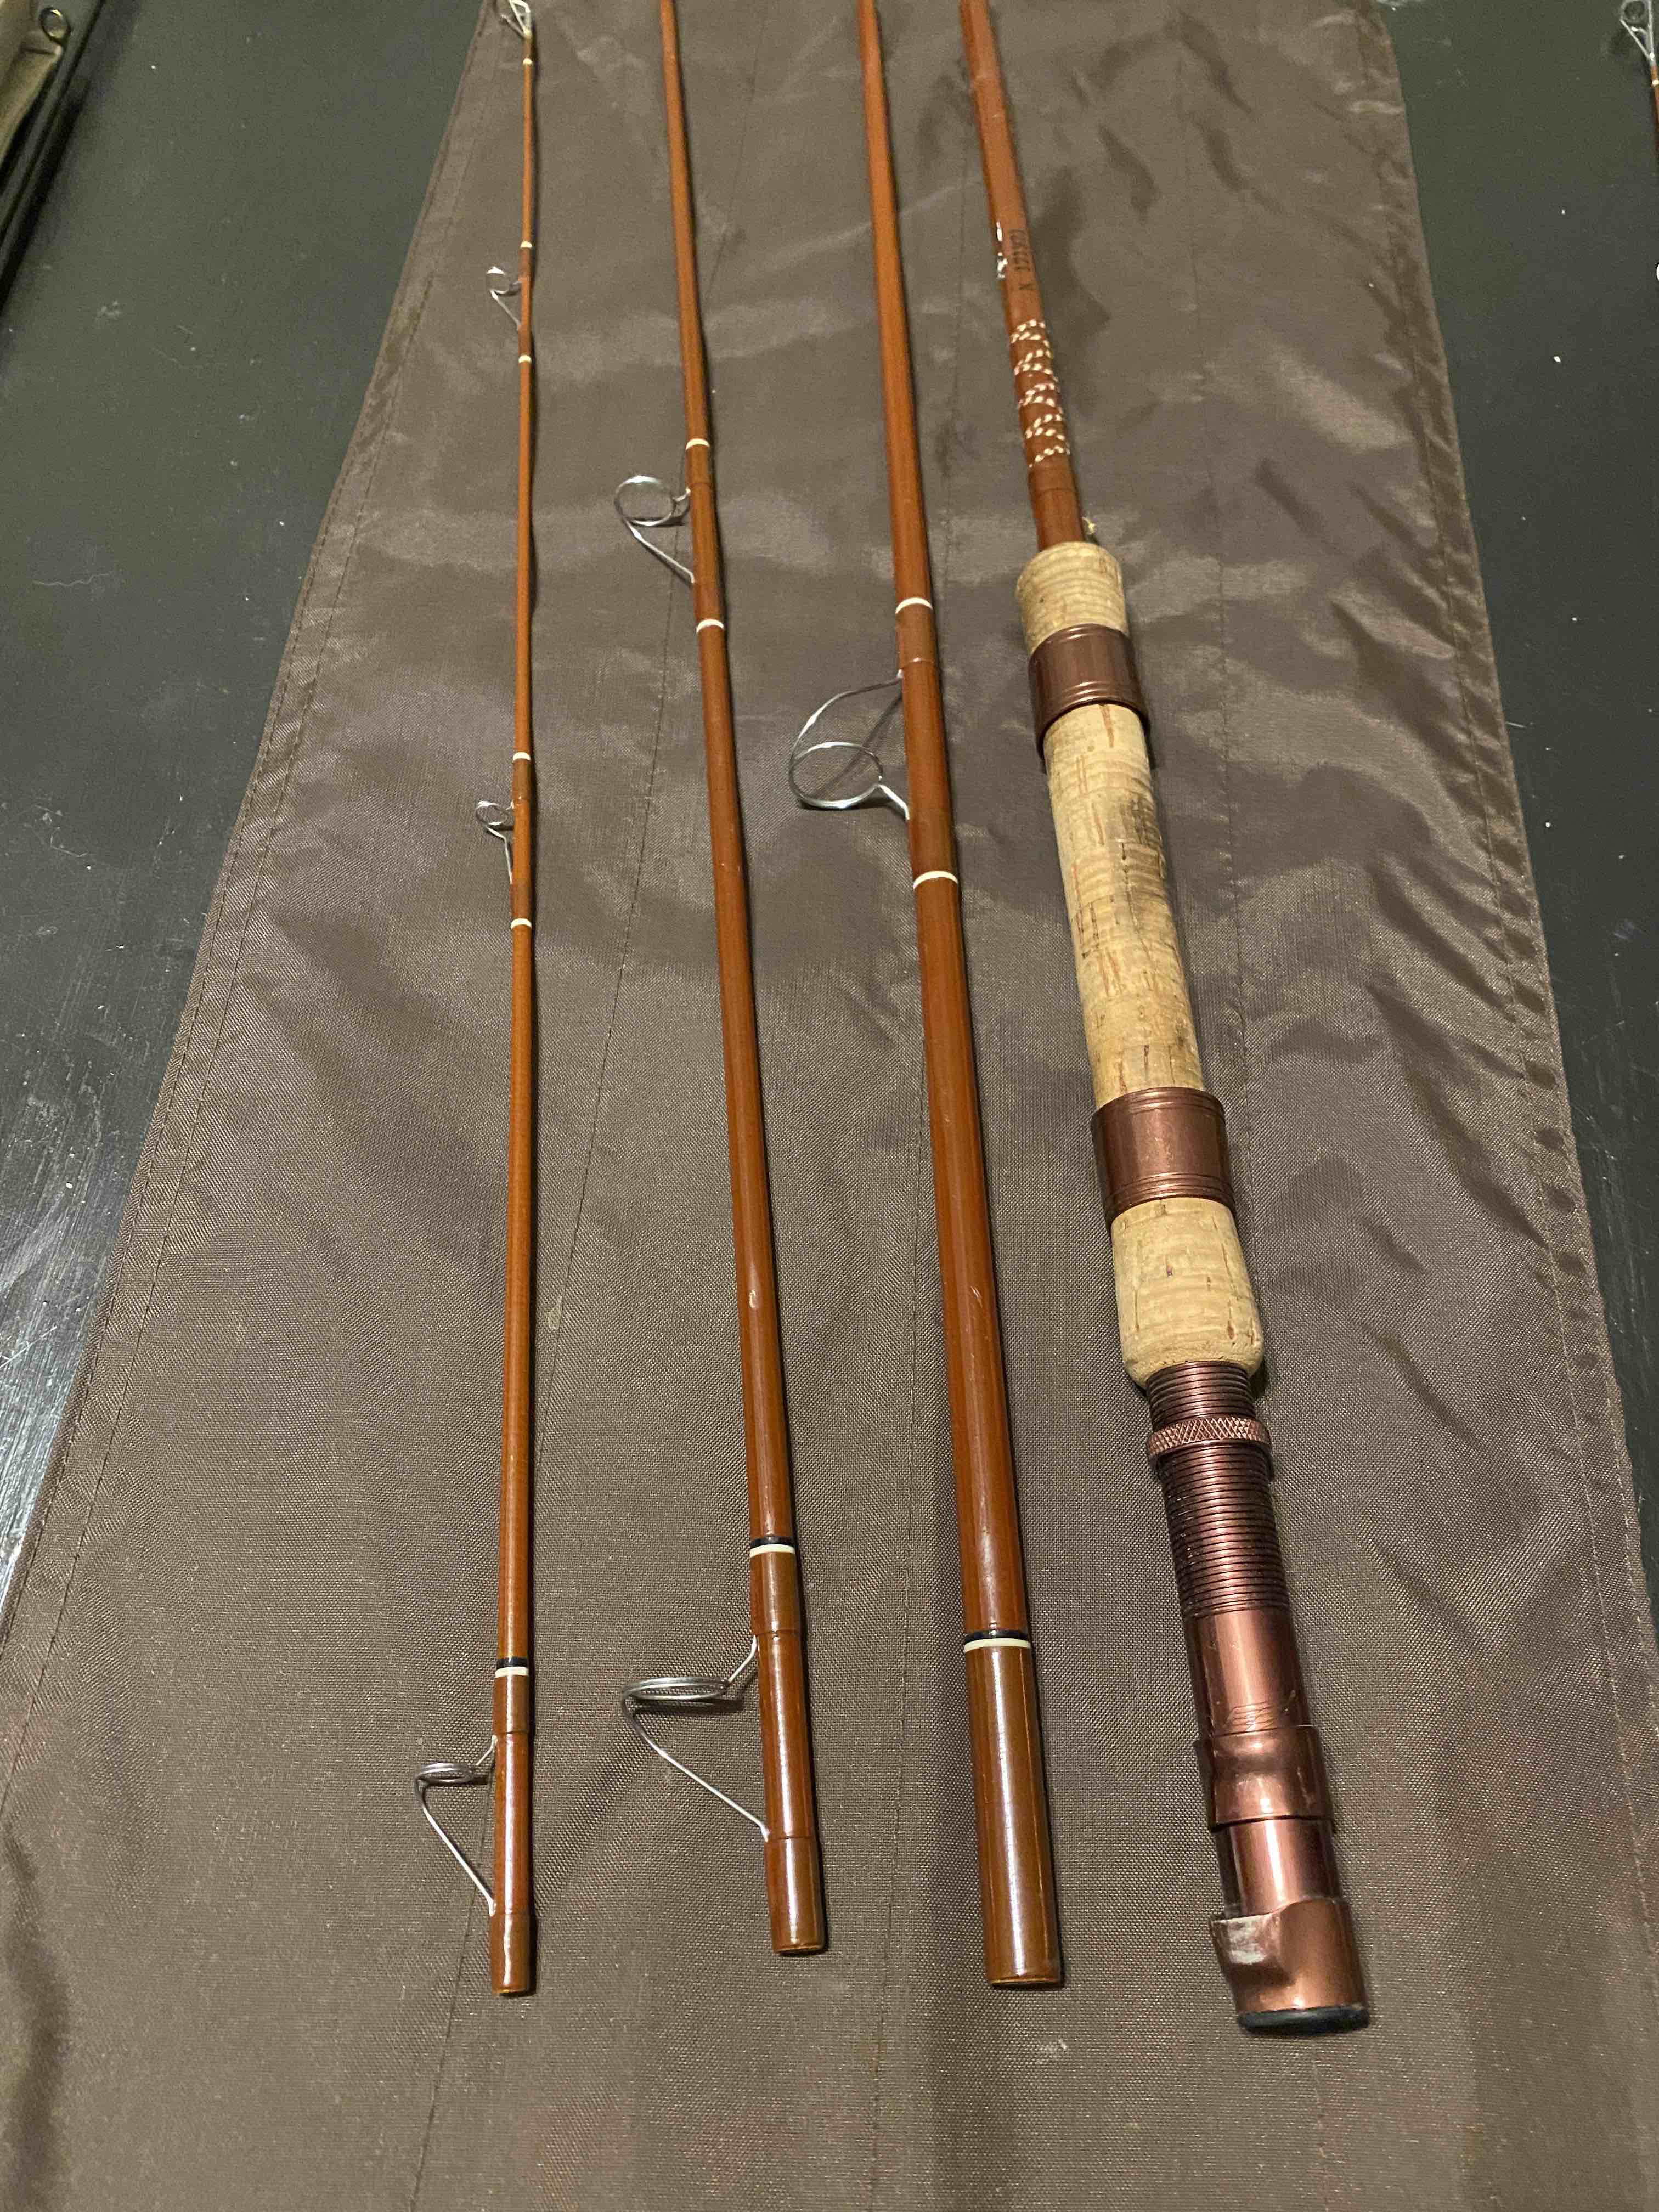 Comparing 4 Iterations of the Fenwick Voyageur SF74-4, Fishing with  Fiberglass Fly Rods